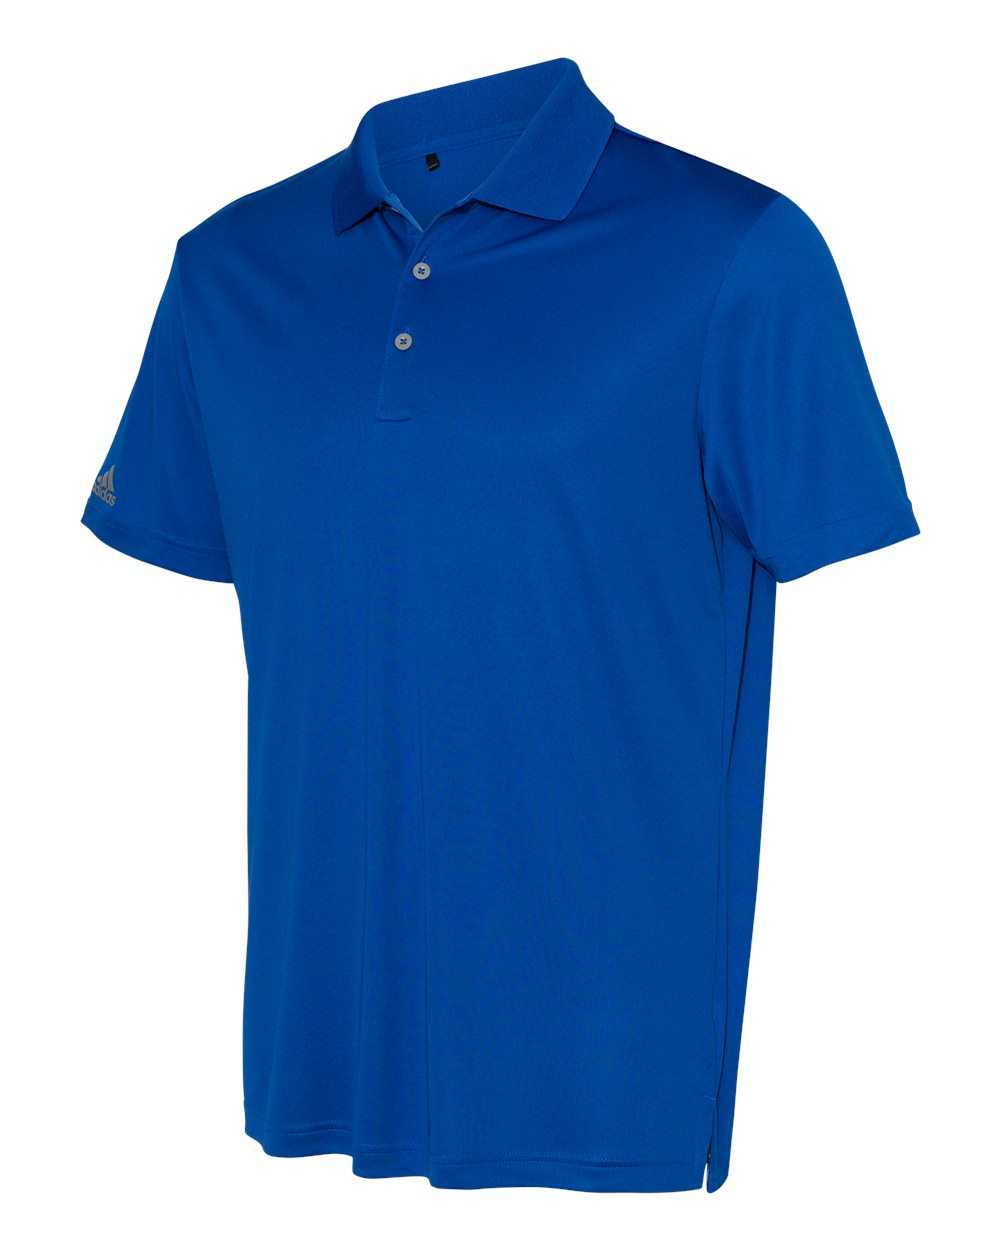 Adidas A230 Performance Sport Shirt - Collegiate Royal - HIT a Double